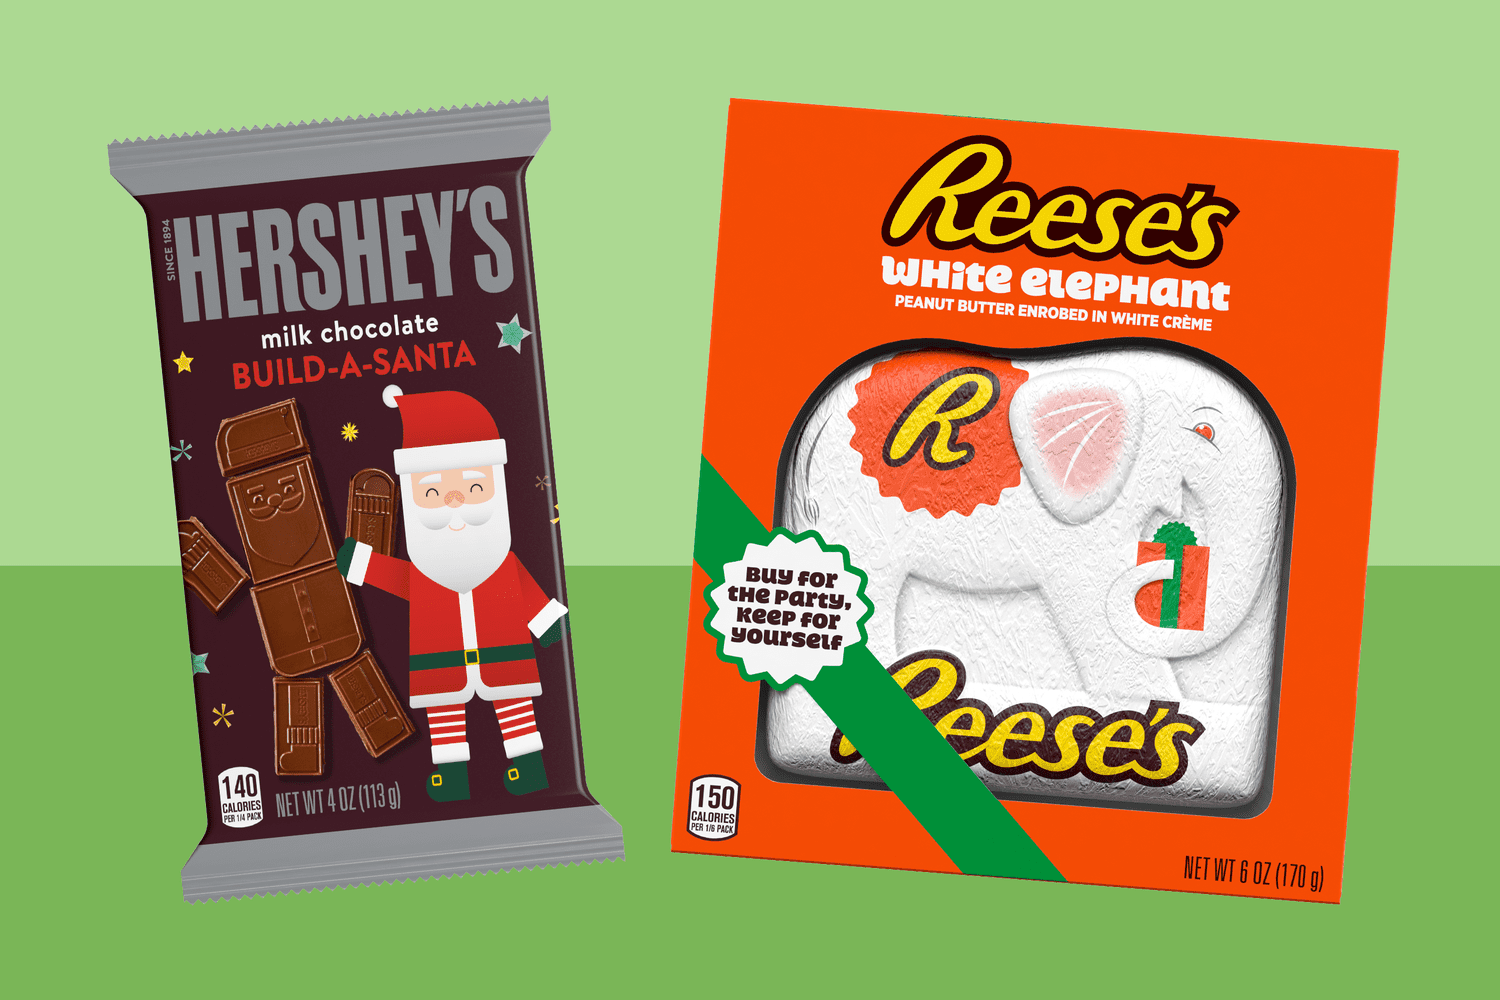 Hershey's Just Unveiled Their 2020 Christmas Candy — and We Don't Know What We Want to Eat First